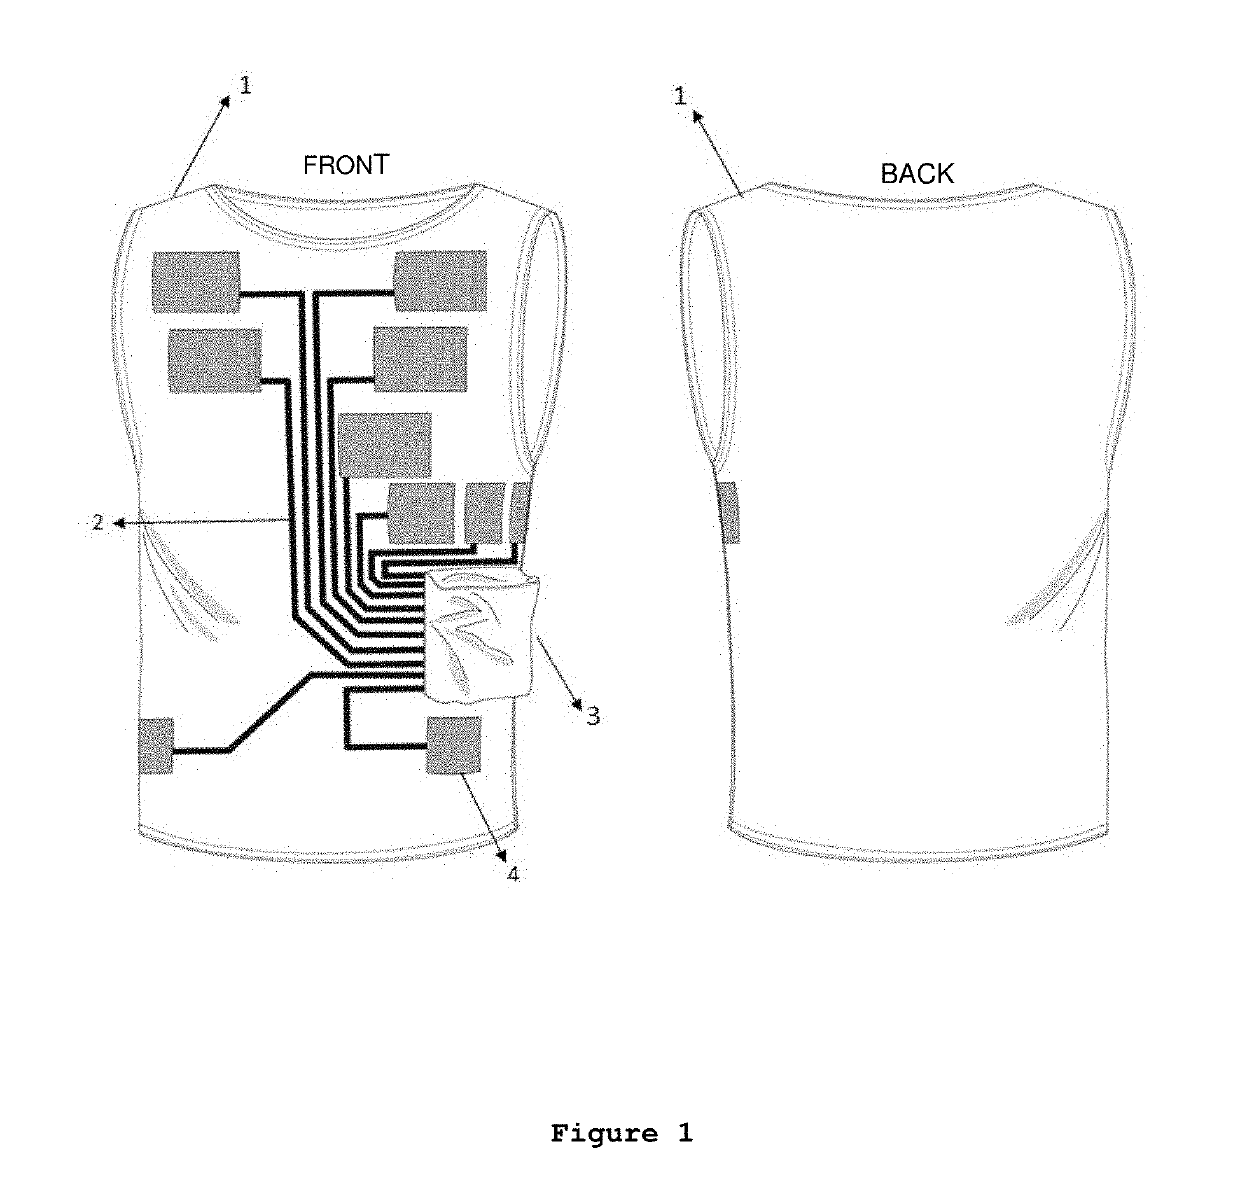 Wearable electrocardiographic monitoring technology (ECG) with an airtight container for medicines, and integrated medical monitoring system